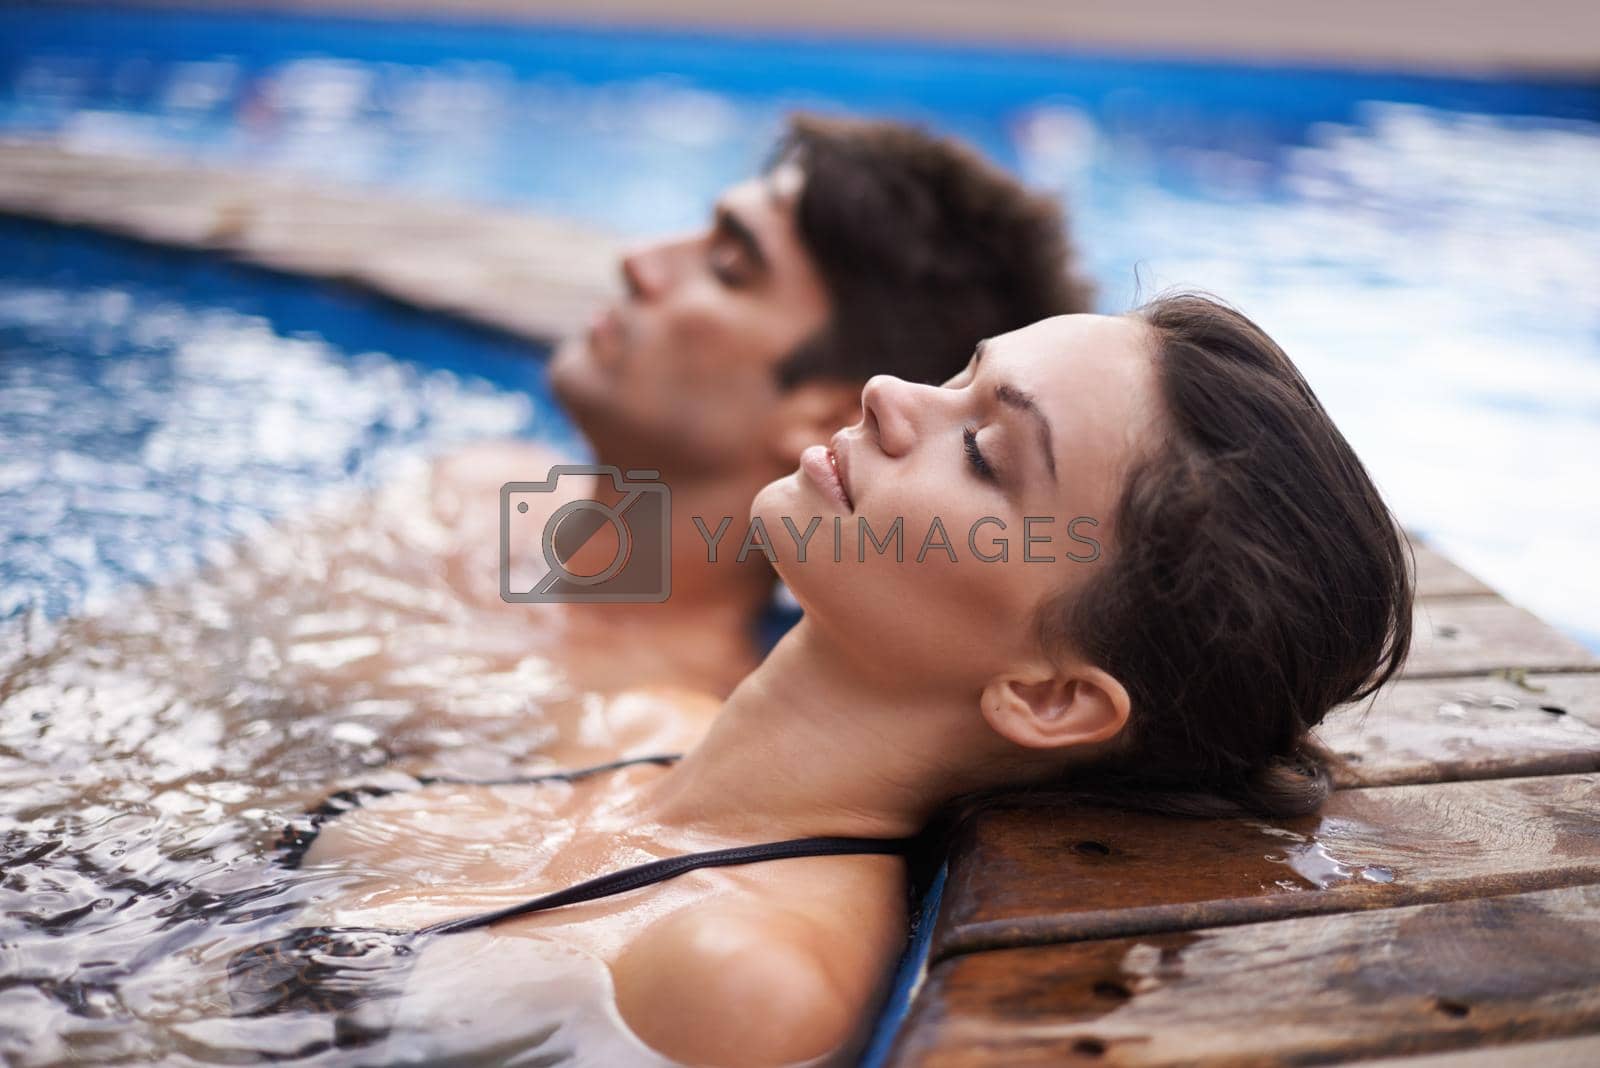 Royalty free image of Letting their minds drift. Shot of an attractive young couple relaxing in a pool. by YuriArcurs